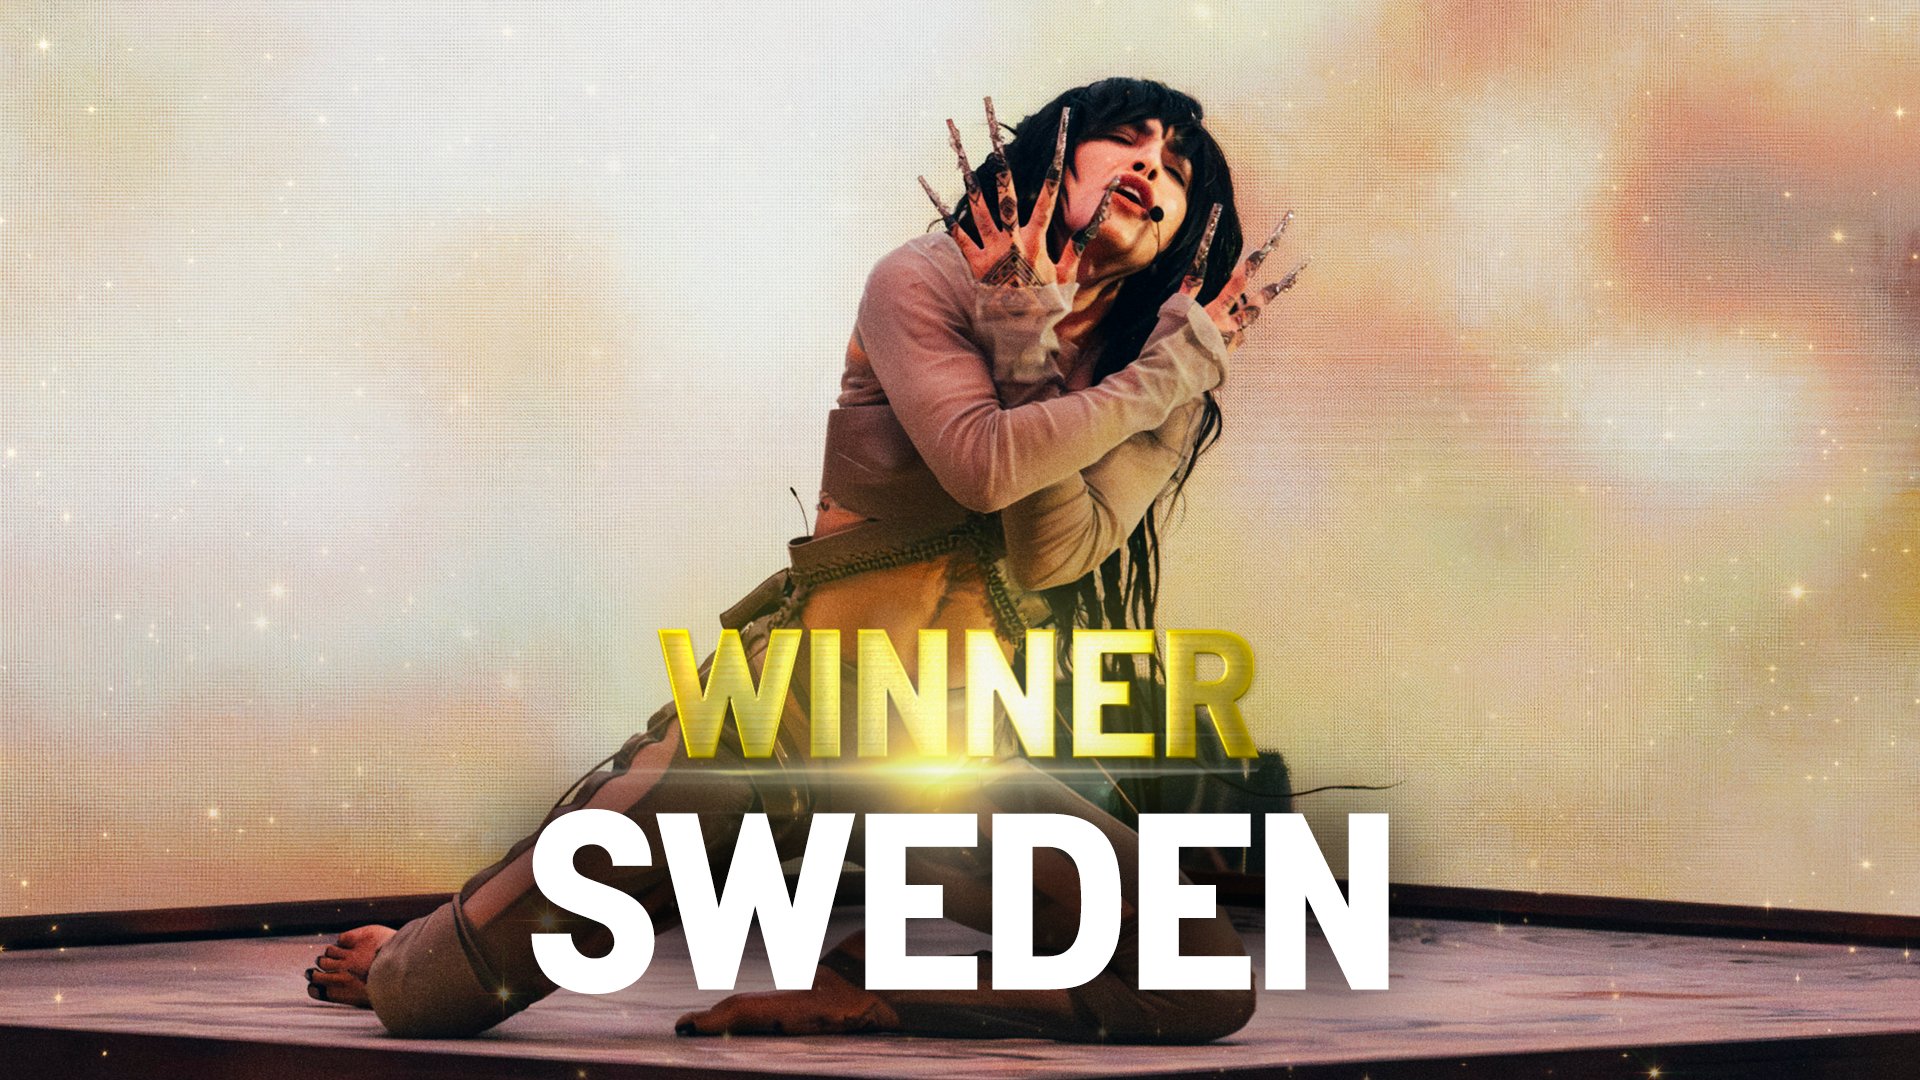 Loreen / Twitter Eurovision Song Contest